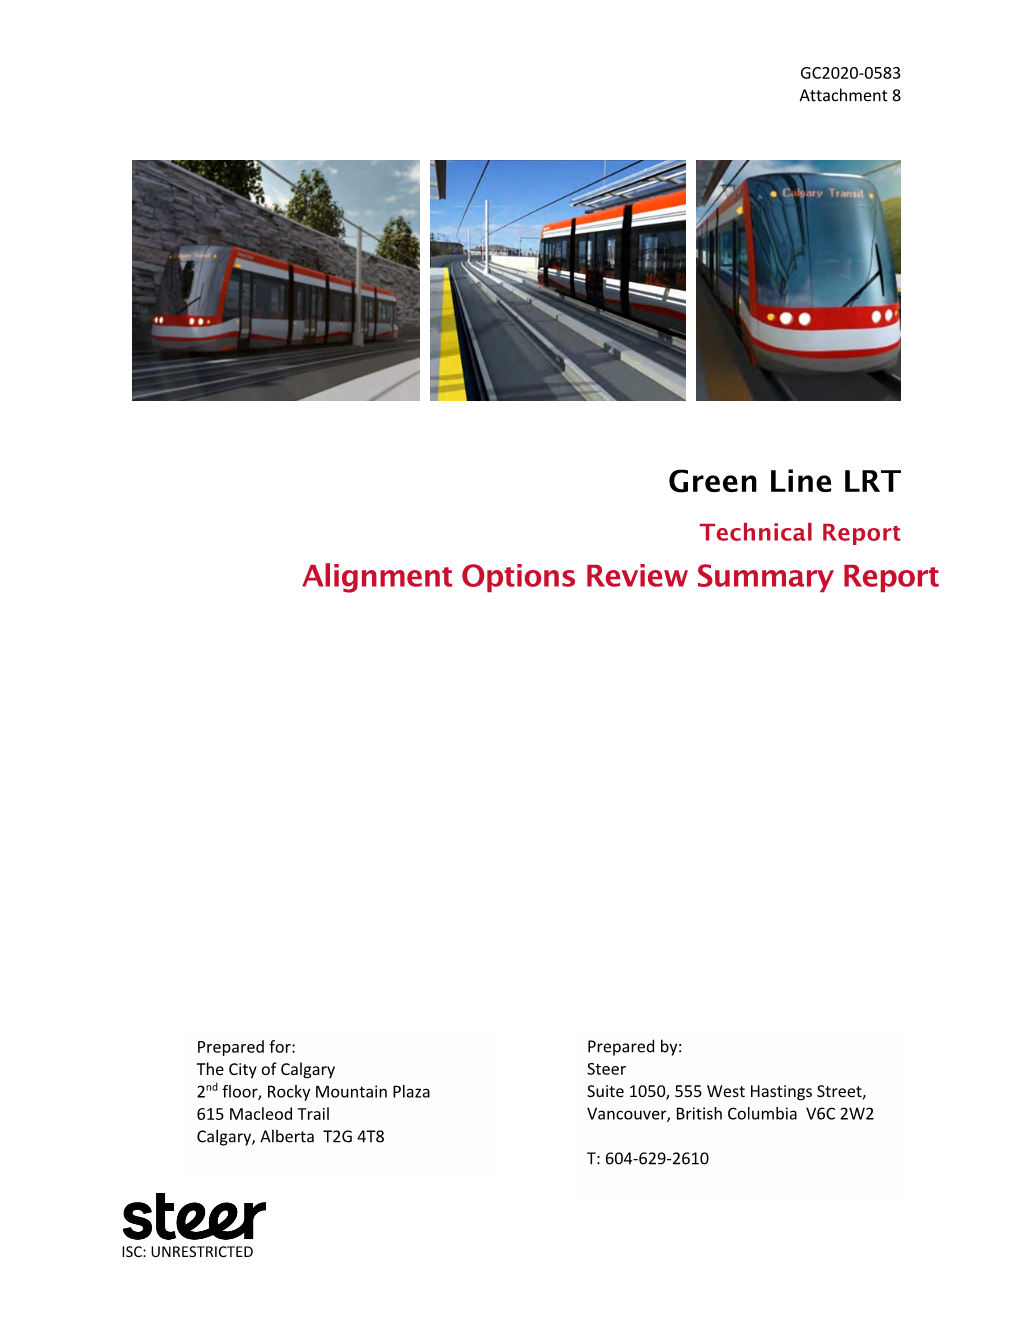 Green Line LRT Alignment Options Review Summary Report